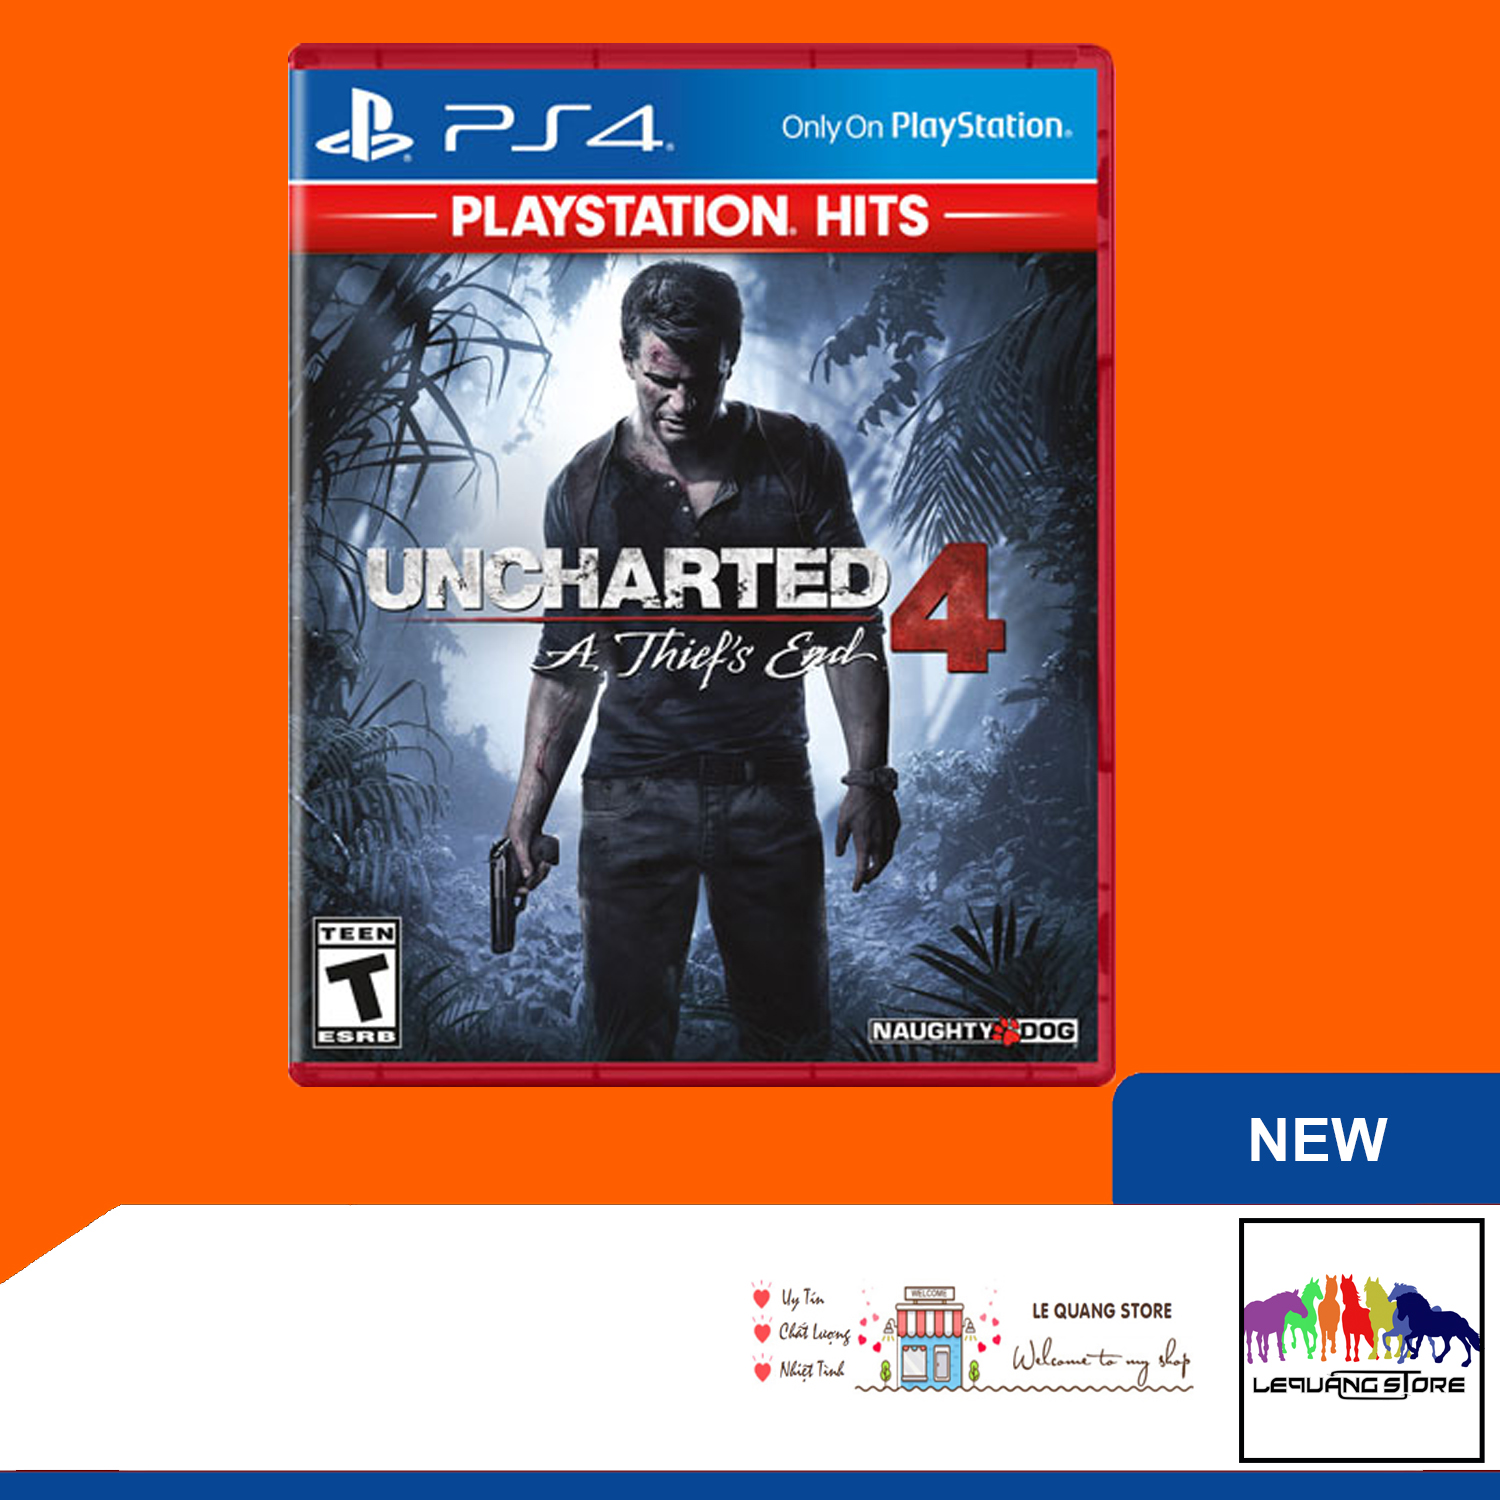 uncharted 4 ps4 game